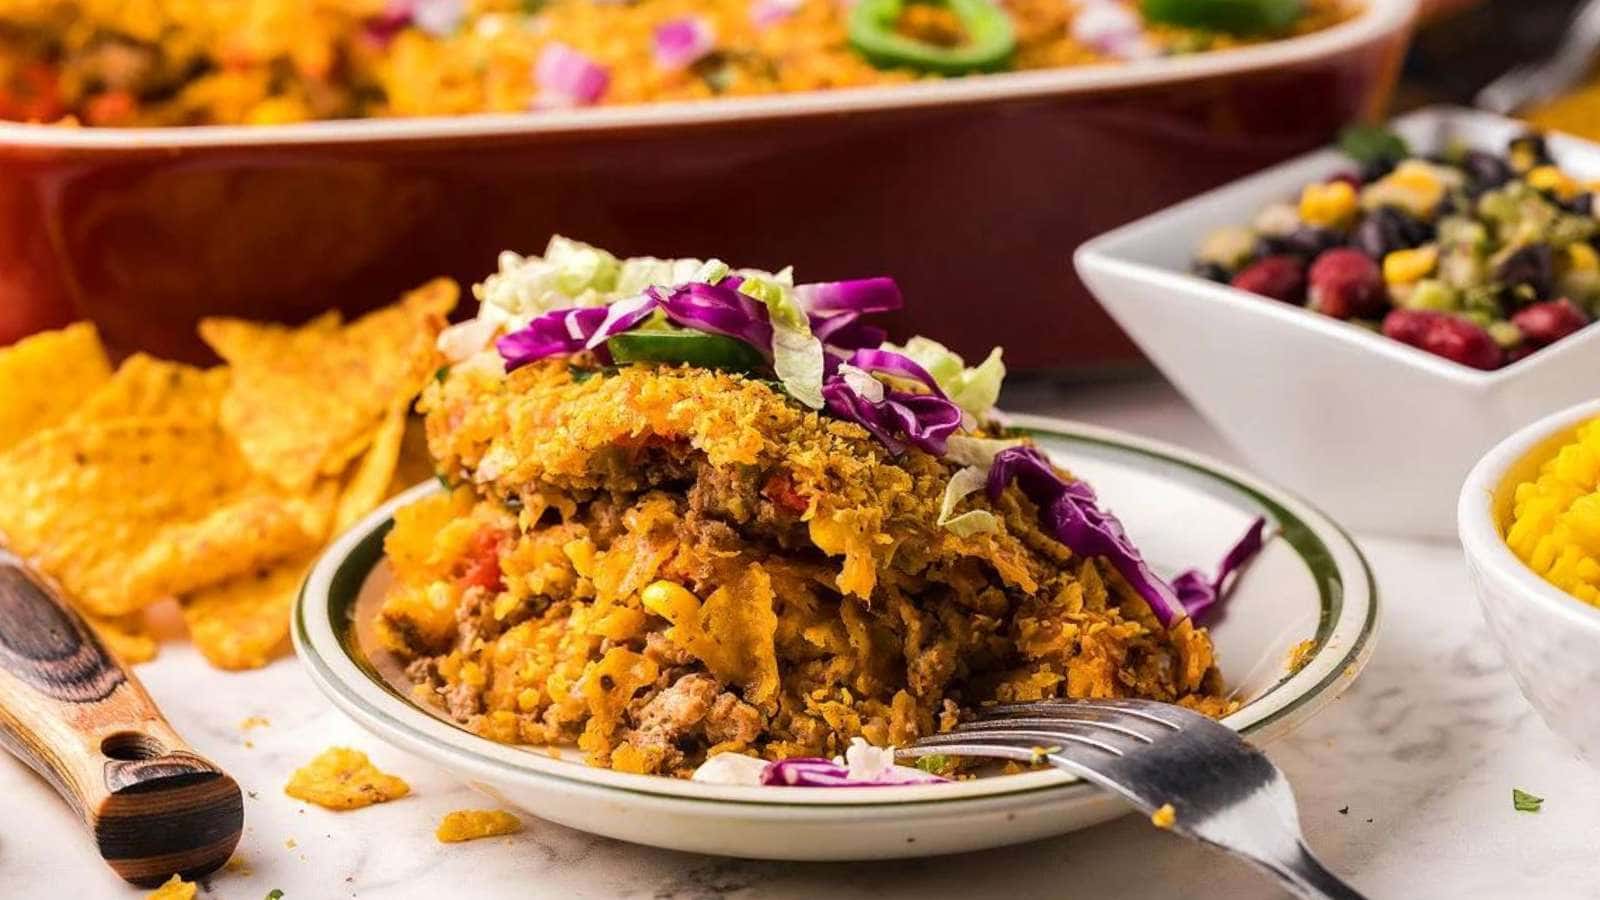 <p>Cool Ranch Turkey Taco Casserole combines ground turkey with Doritos, vegetables, Greek yogurt, taco seasoning, and more. This is a simple recipe to make. If you’re on the lookout for a Mexican inspired meal, give this easy taco bake Dorito casserole a try.</p><p><strong>Get the Recipe: <a href="https://xoxobella.com/cool-ranch-turkey-taco-casserole" rel="noreferrer noopener">Cool Ranch Turkey Taco Casserole</a></strong></p>